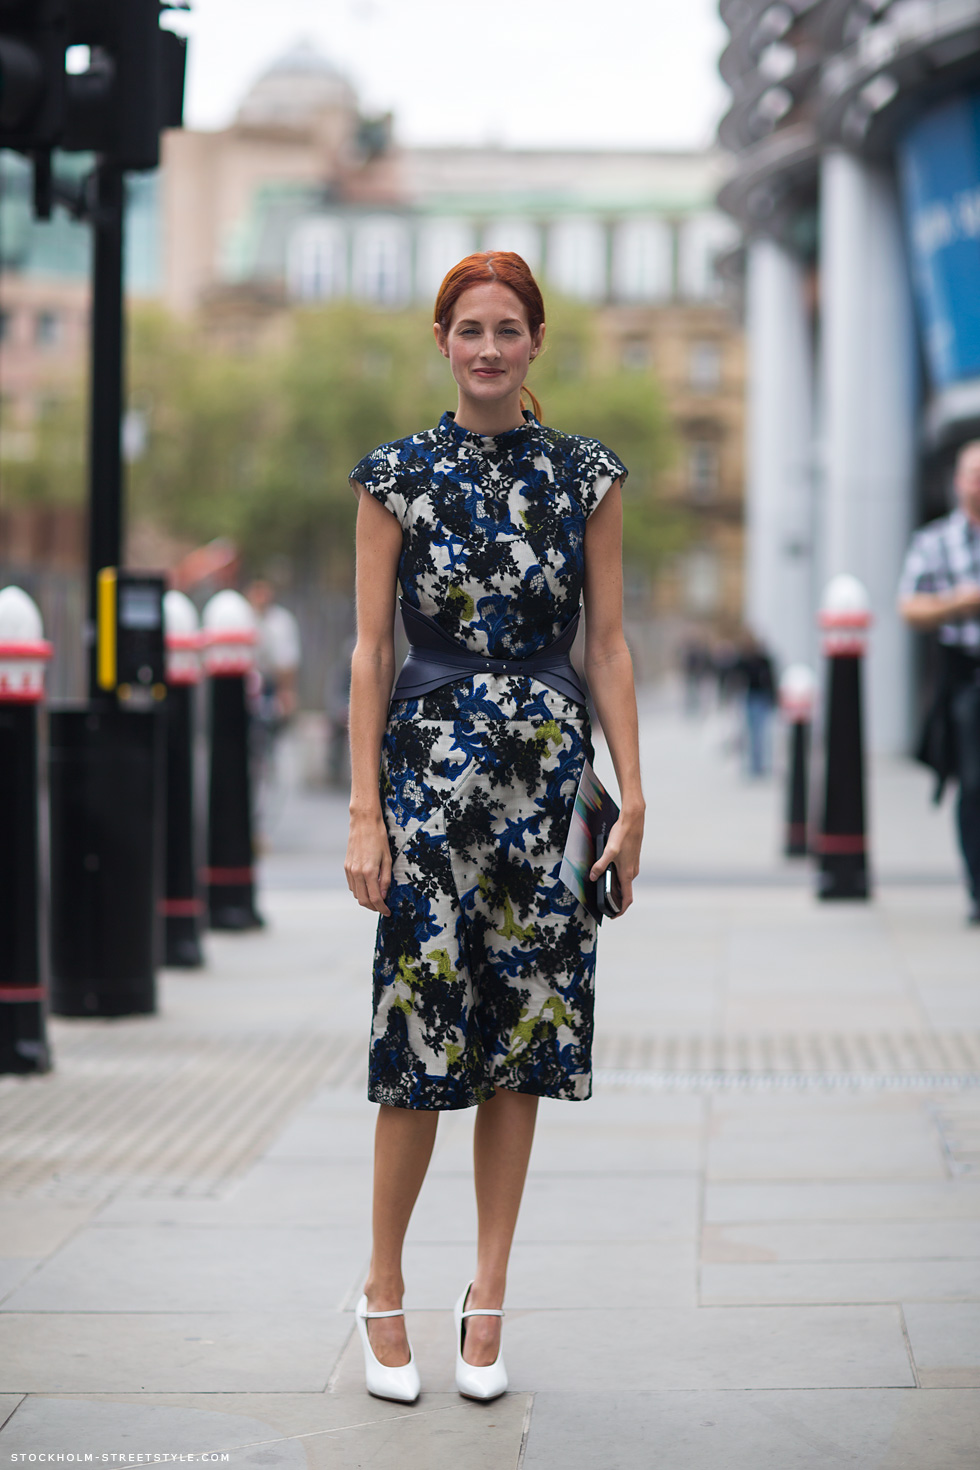 STYLE STAR: TAYLOR TOMASI HILL — Ashley Manfred Design